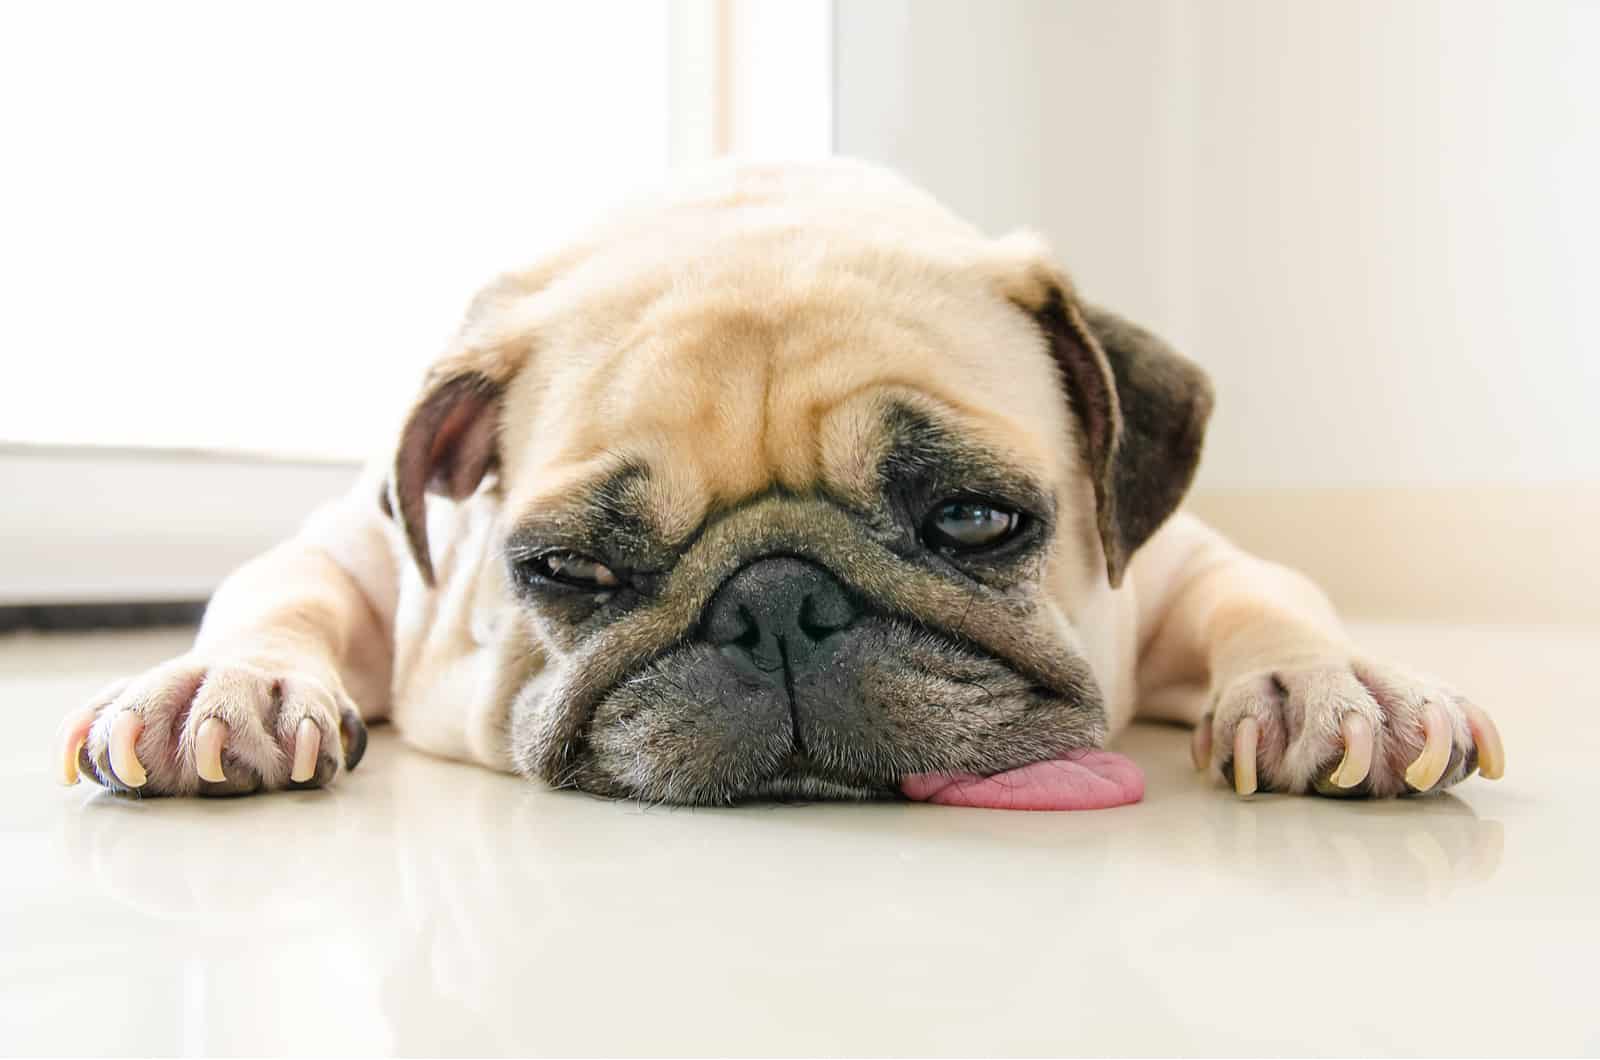 My Dog Is Gagging And Not Throwing Up: 6 Possible Causes